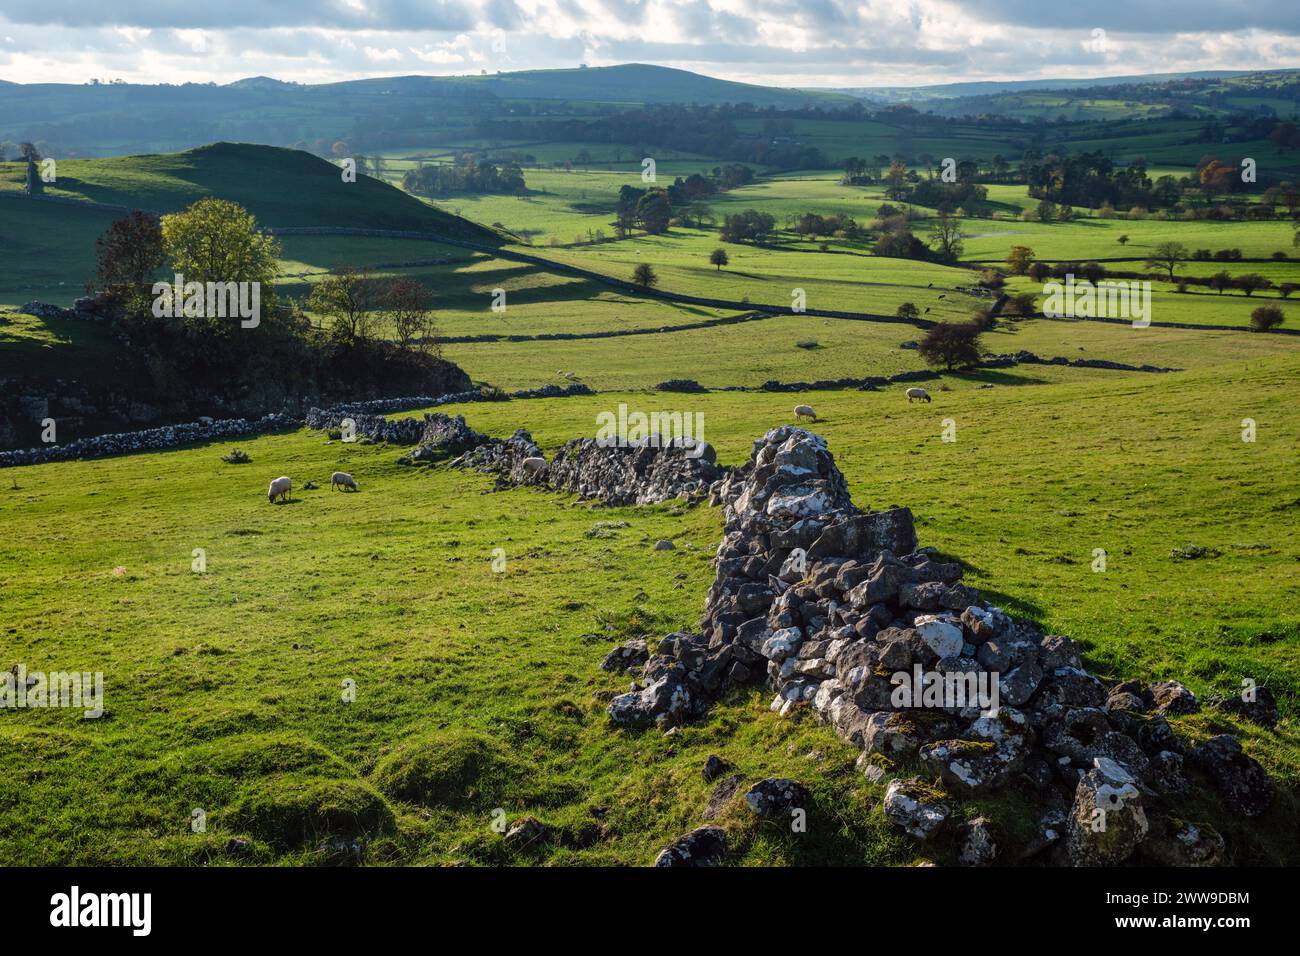 Typical White Peak landscape - view of the Dove Valley with Ecton Hill in the distance from Reynards Lane, Hartington, Peak District, Derbyshire Stock Photo